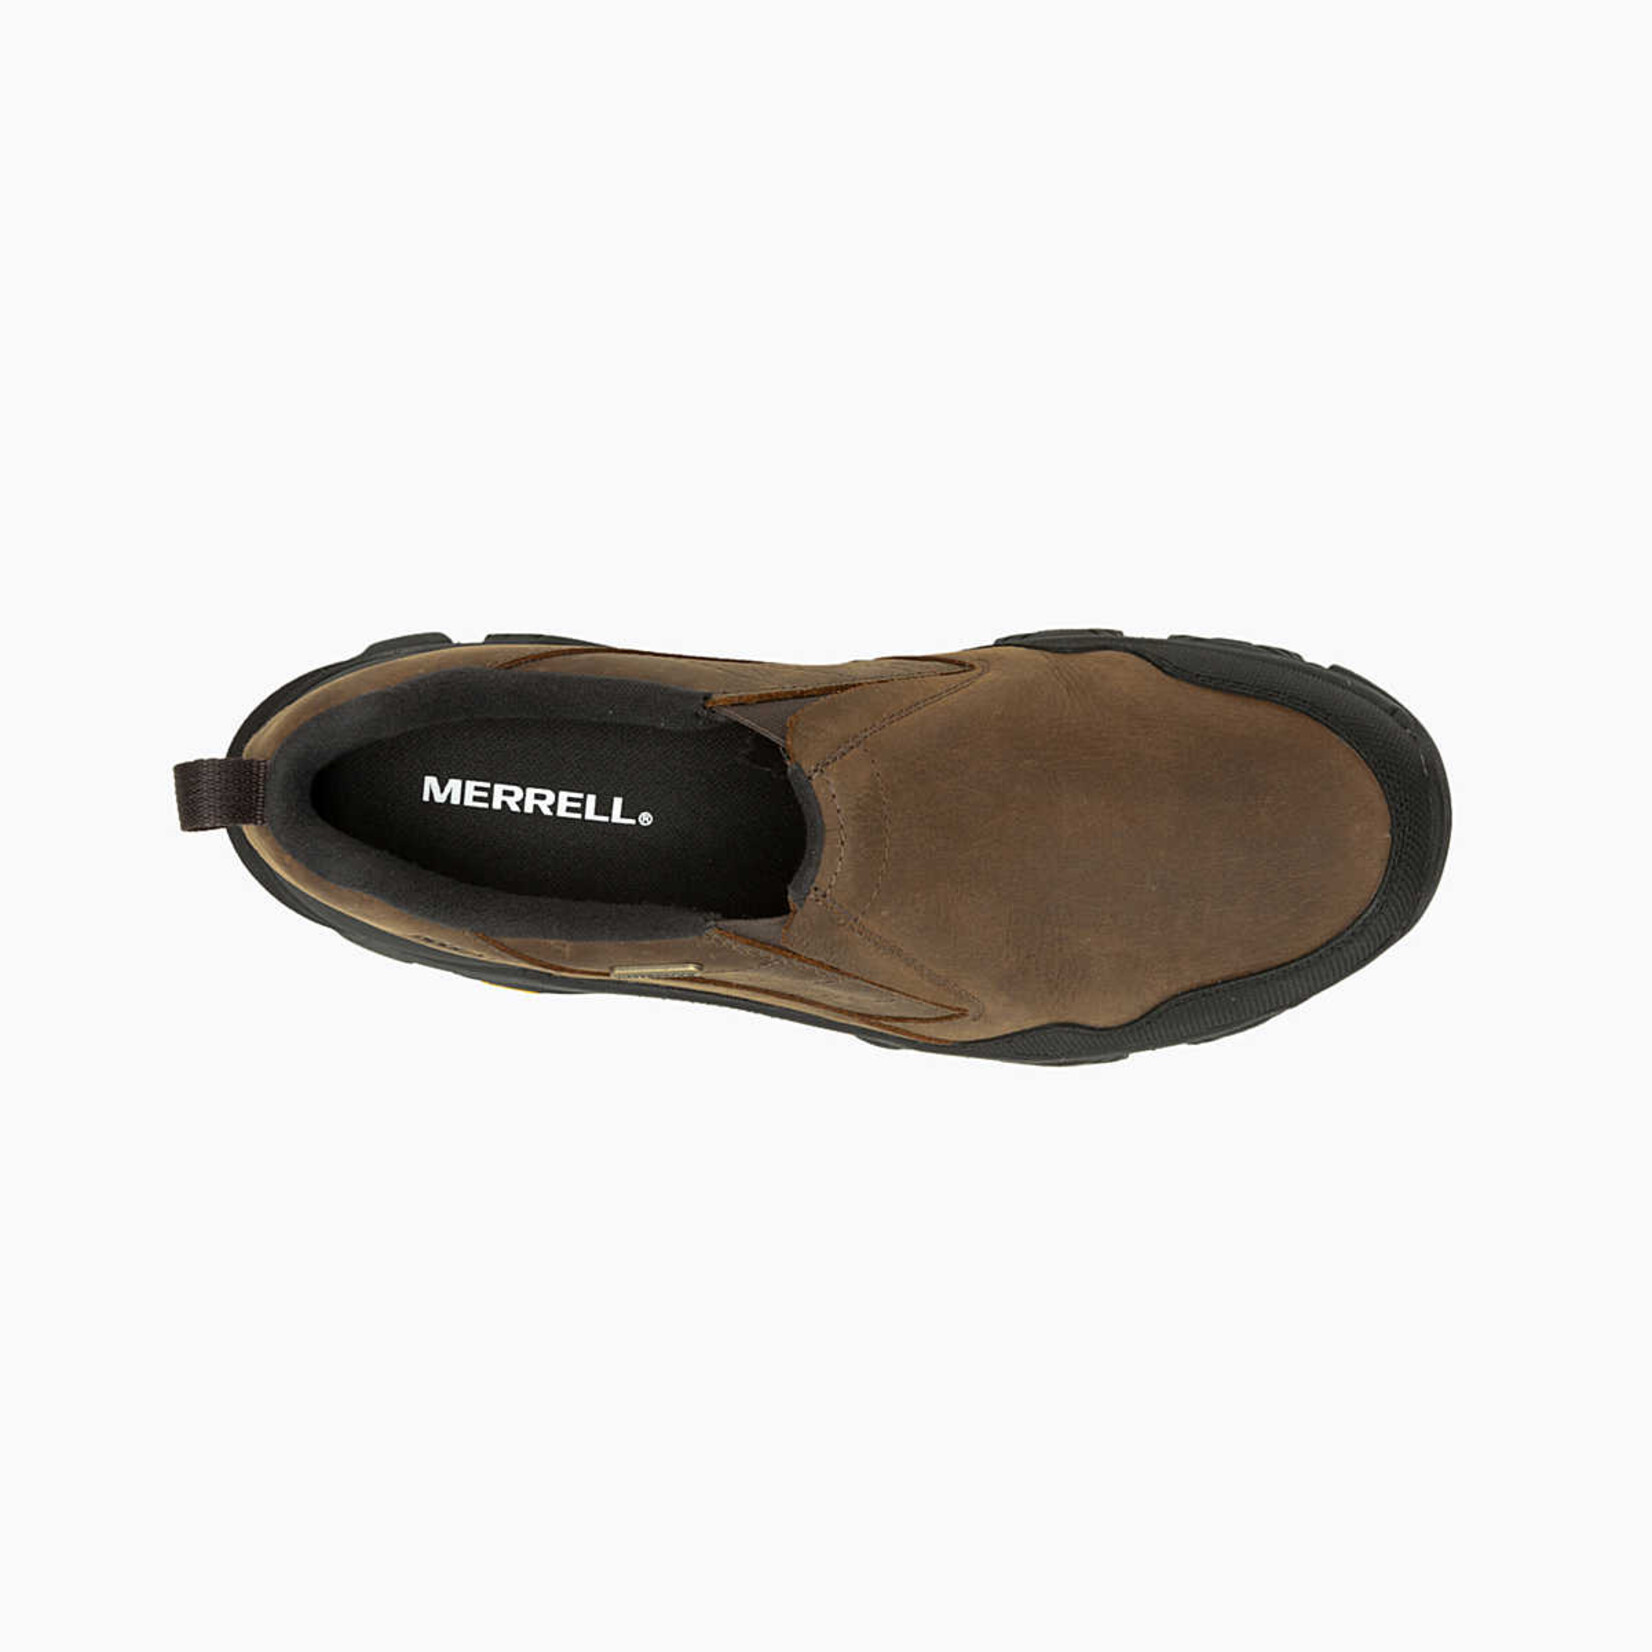 Merrell MERRELL ColdPack 3 Thermo Moc Waterproof